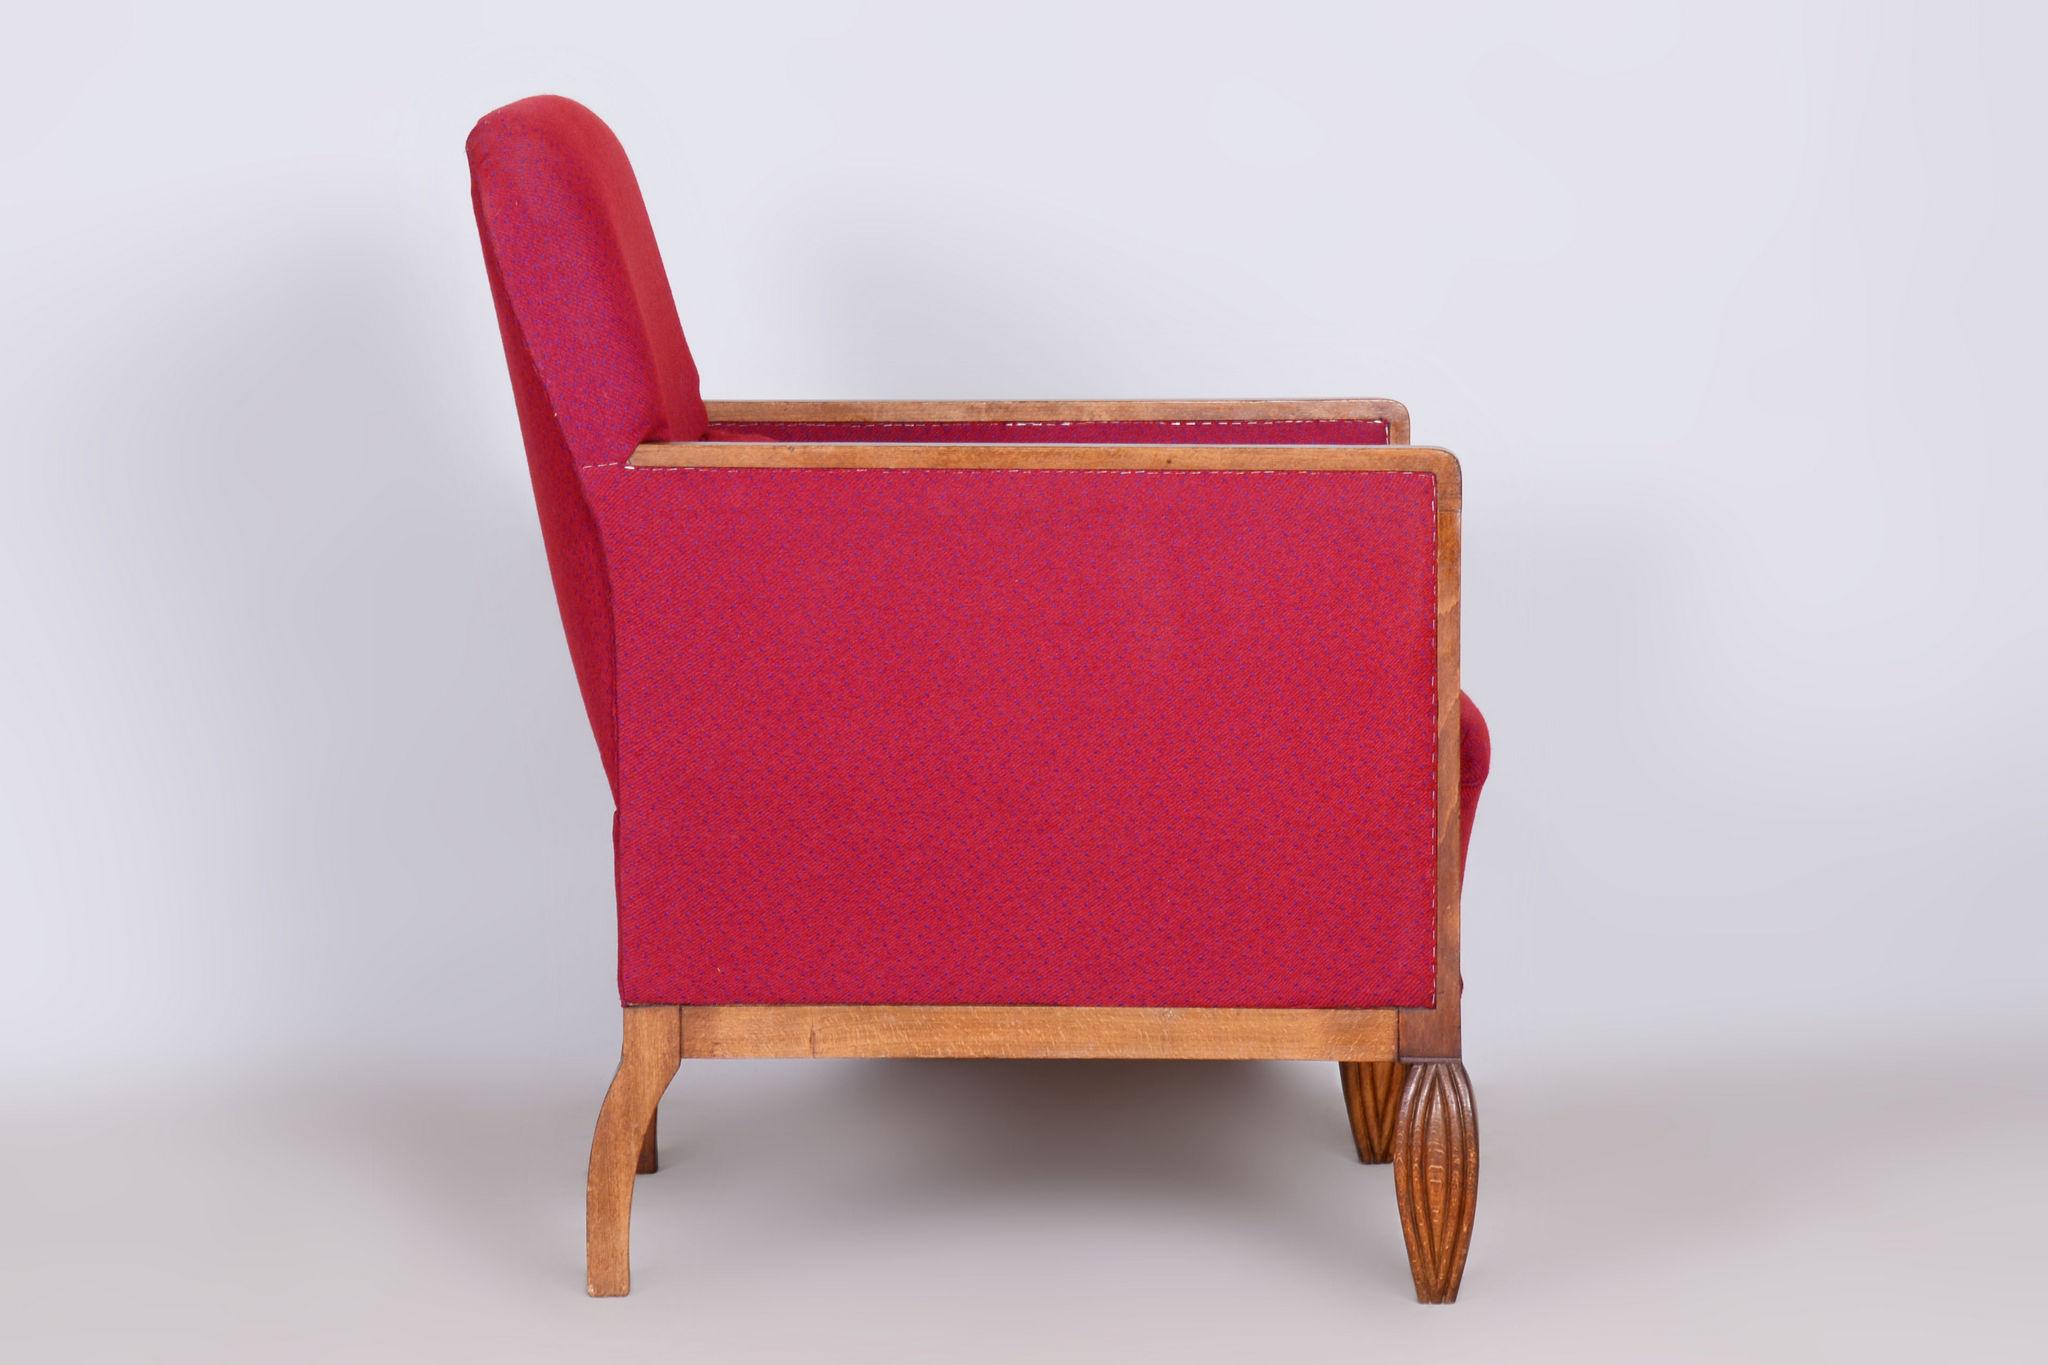 Restored Art Deco Red Armchair, Beech, Original Upholstery, France, 1930s For Sale 1